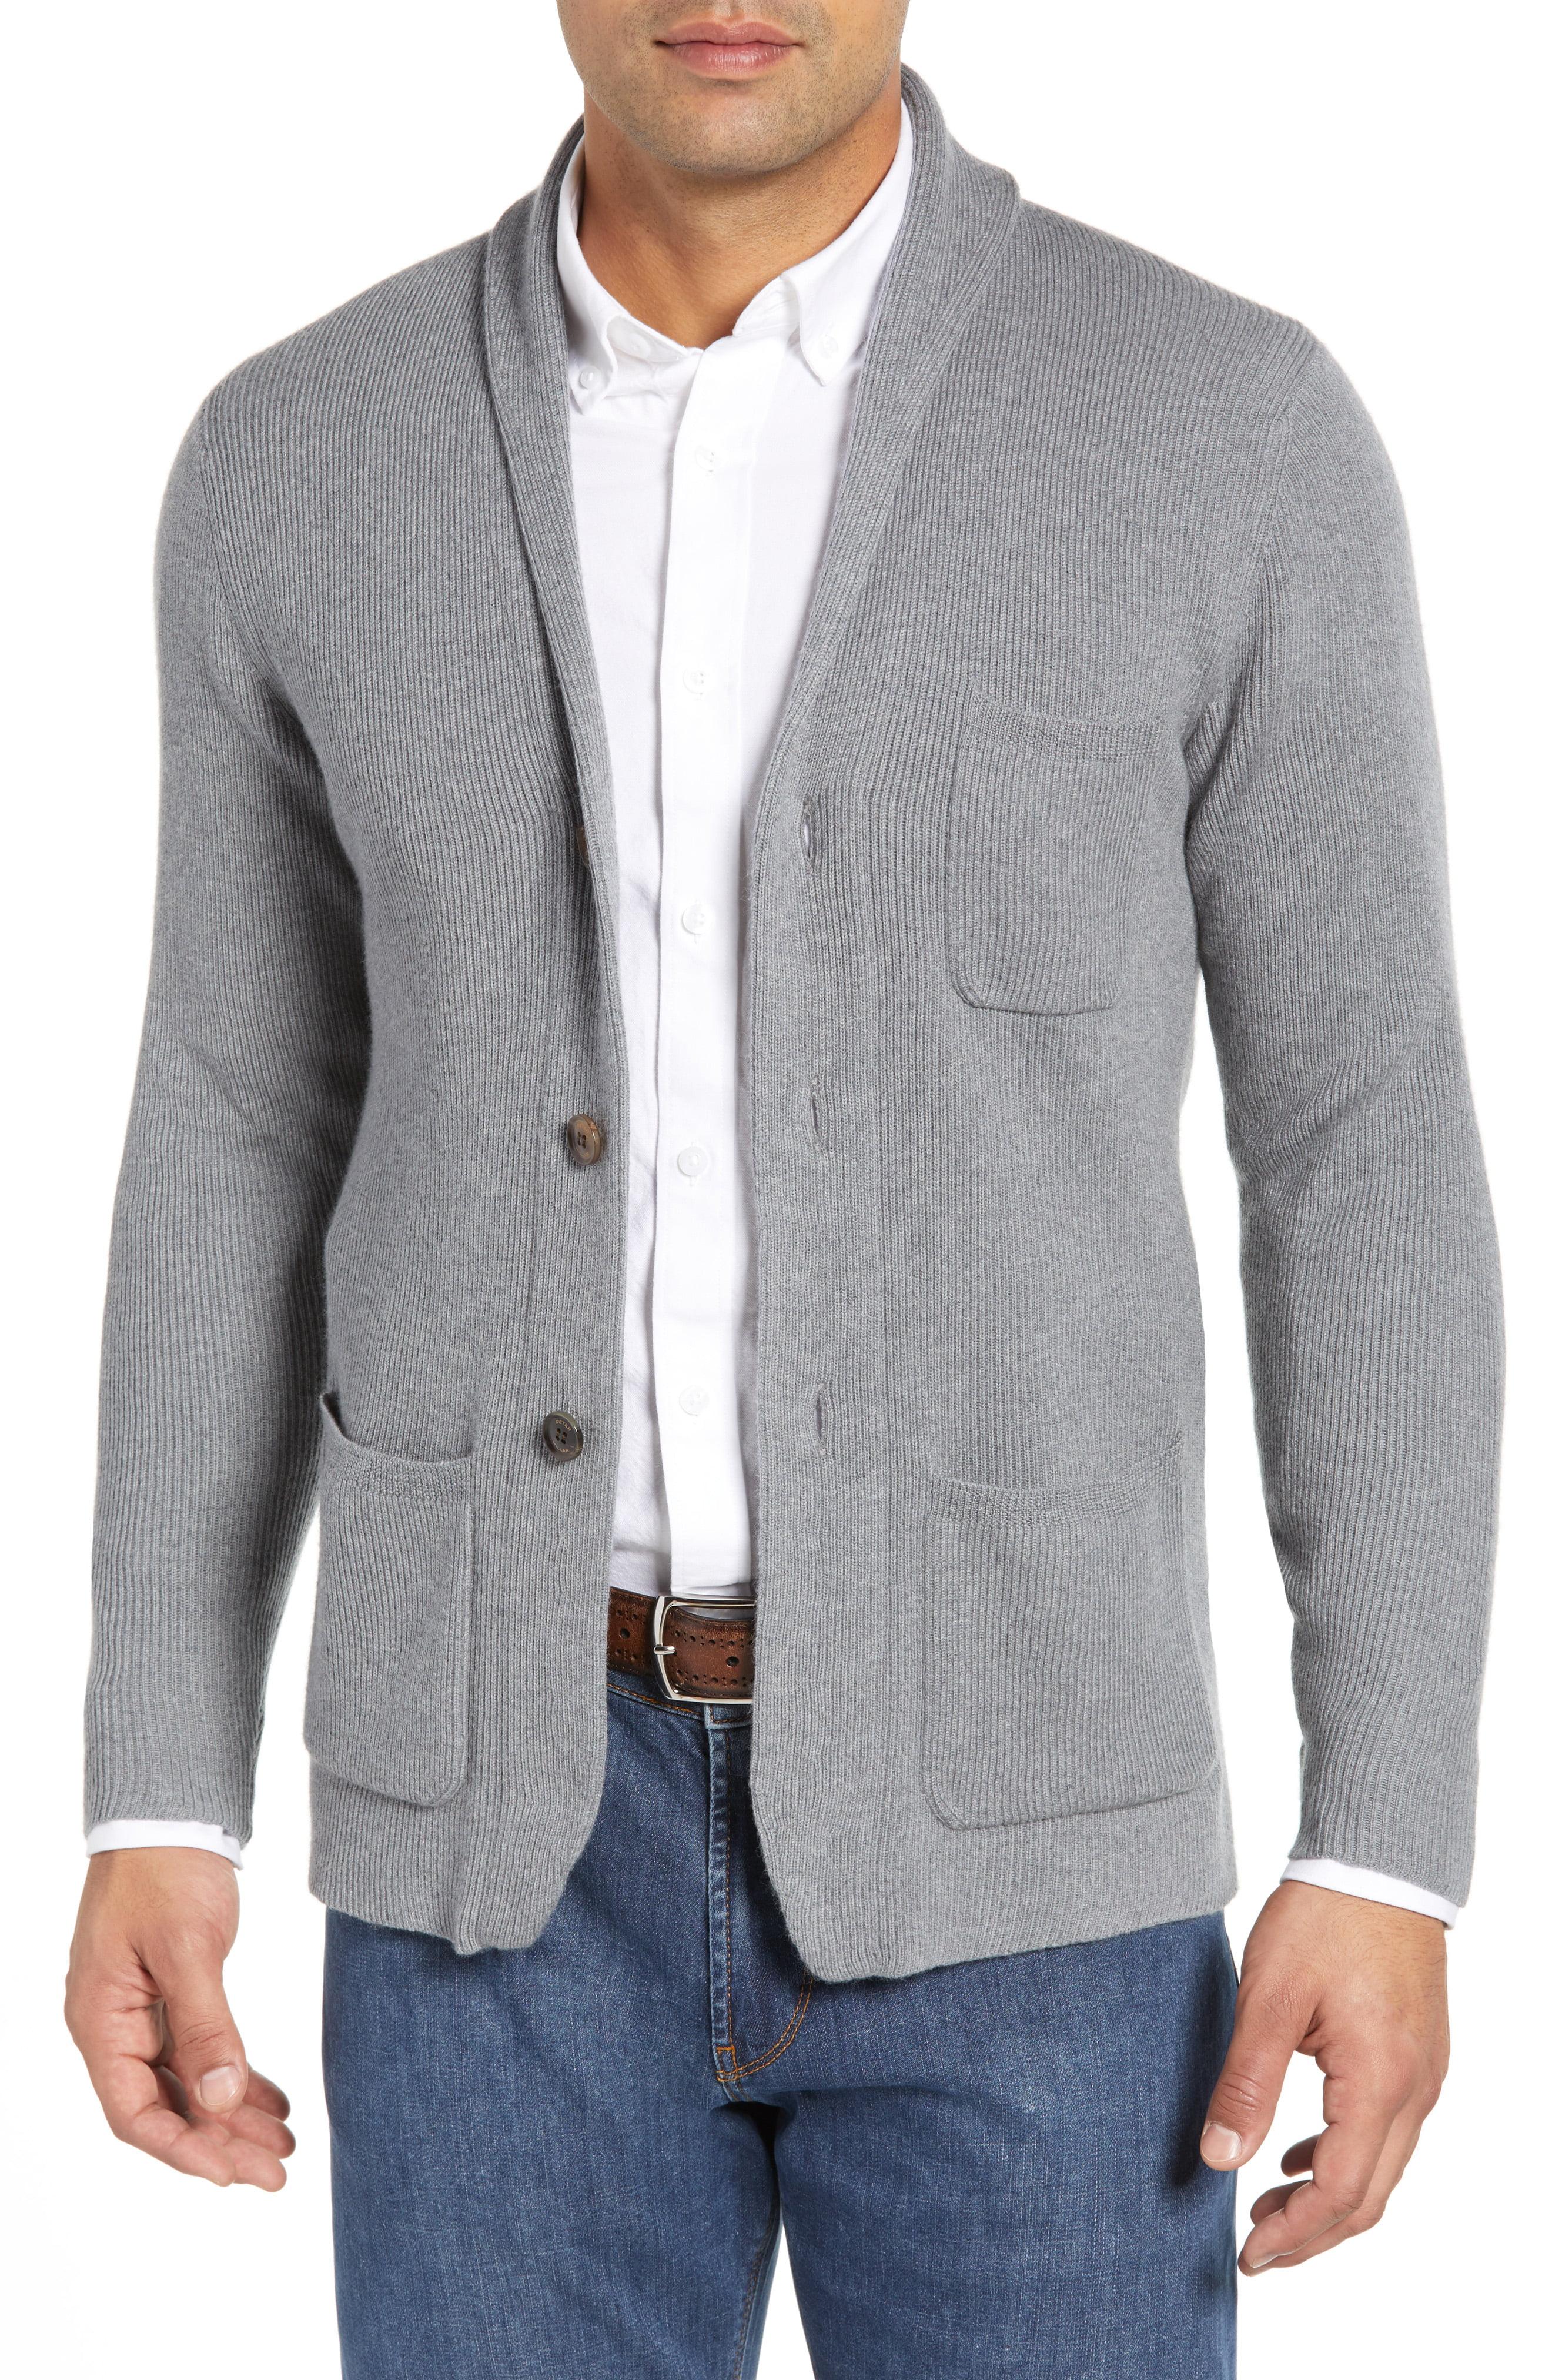 Lyst - Peter Millar Whites Wool & Cashmere Cardigan in Gray for Men